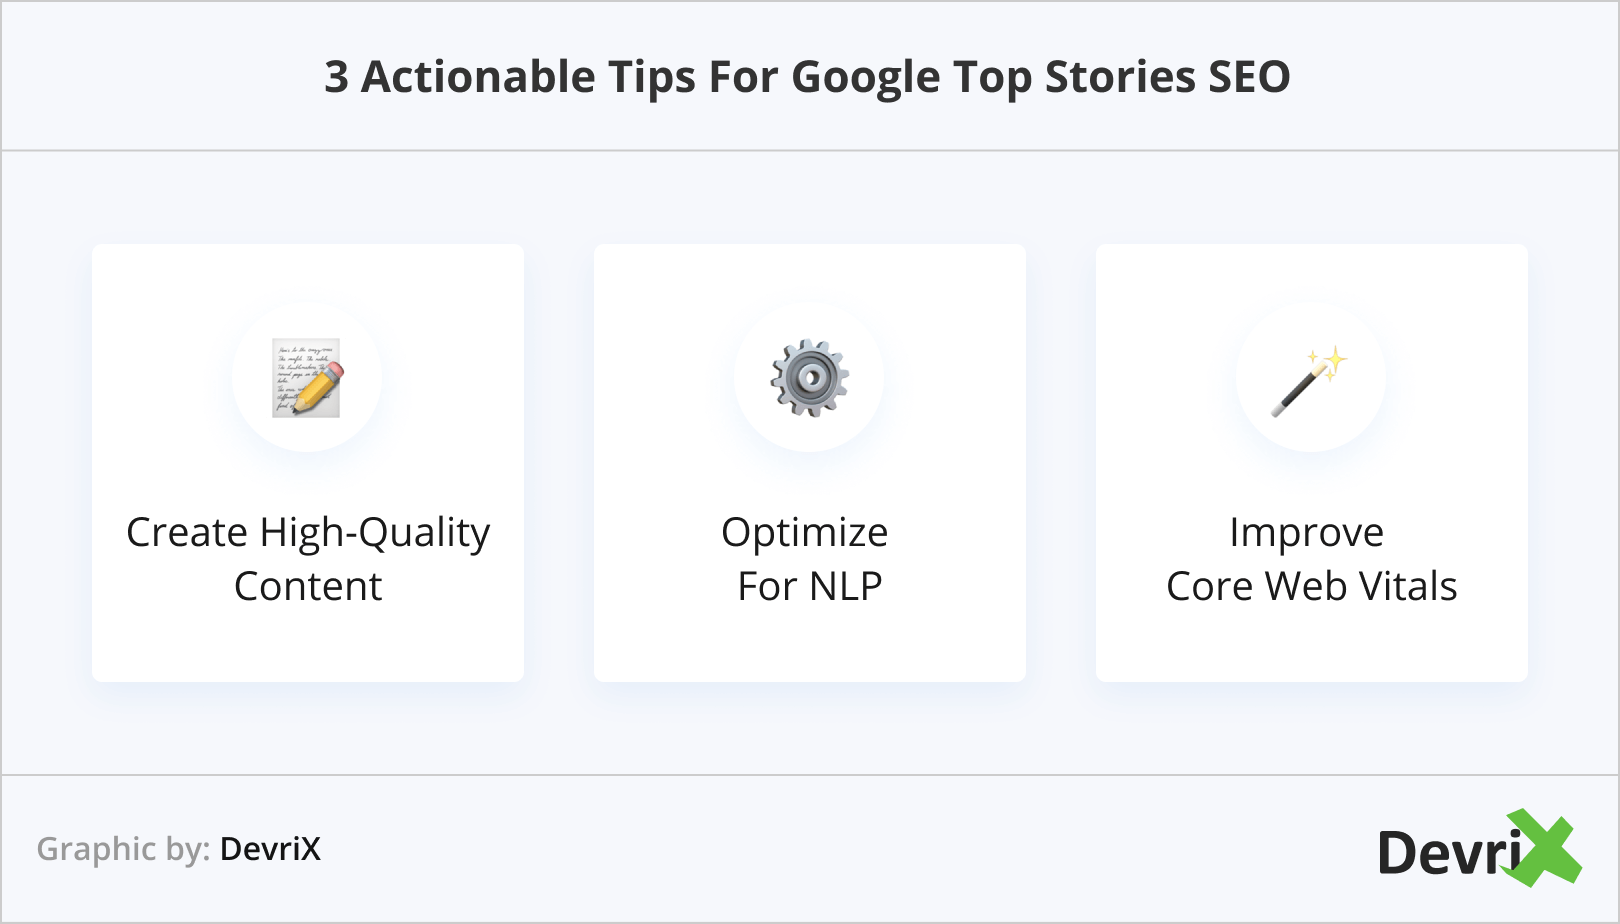 3 Actionable Tips for Google Top Stories SEO